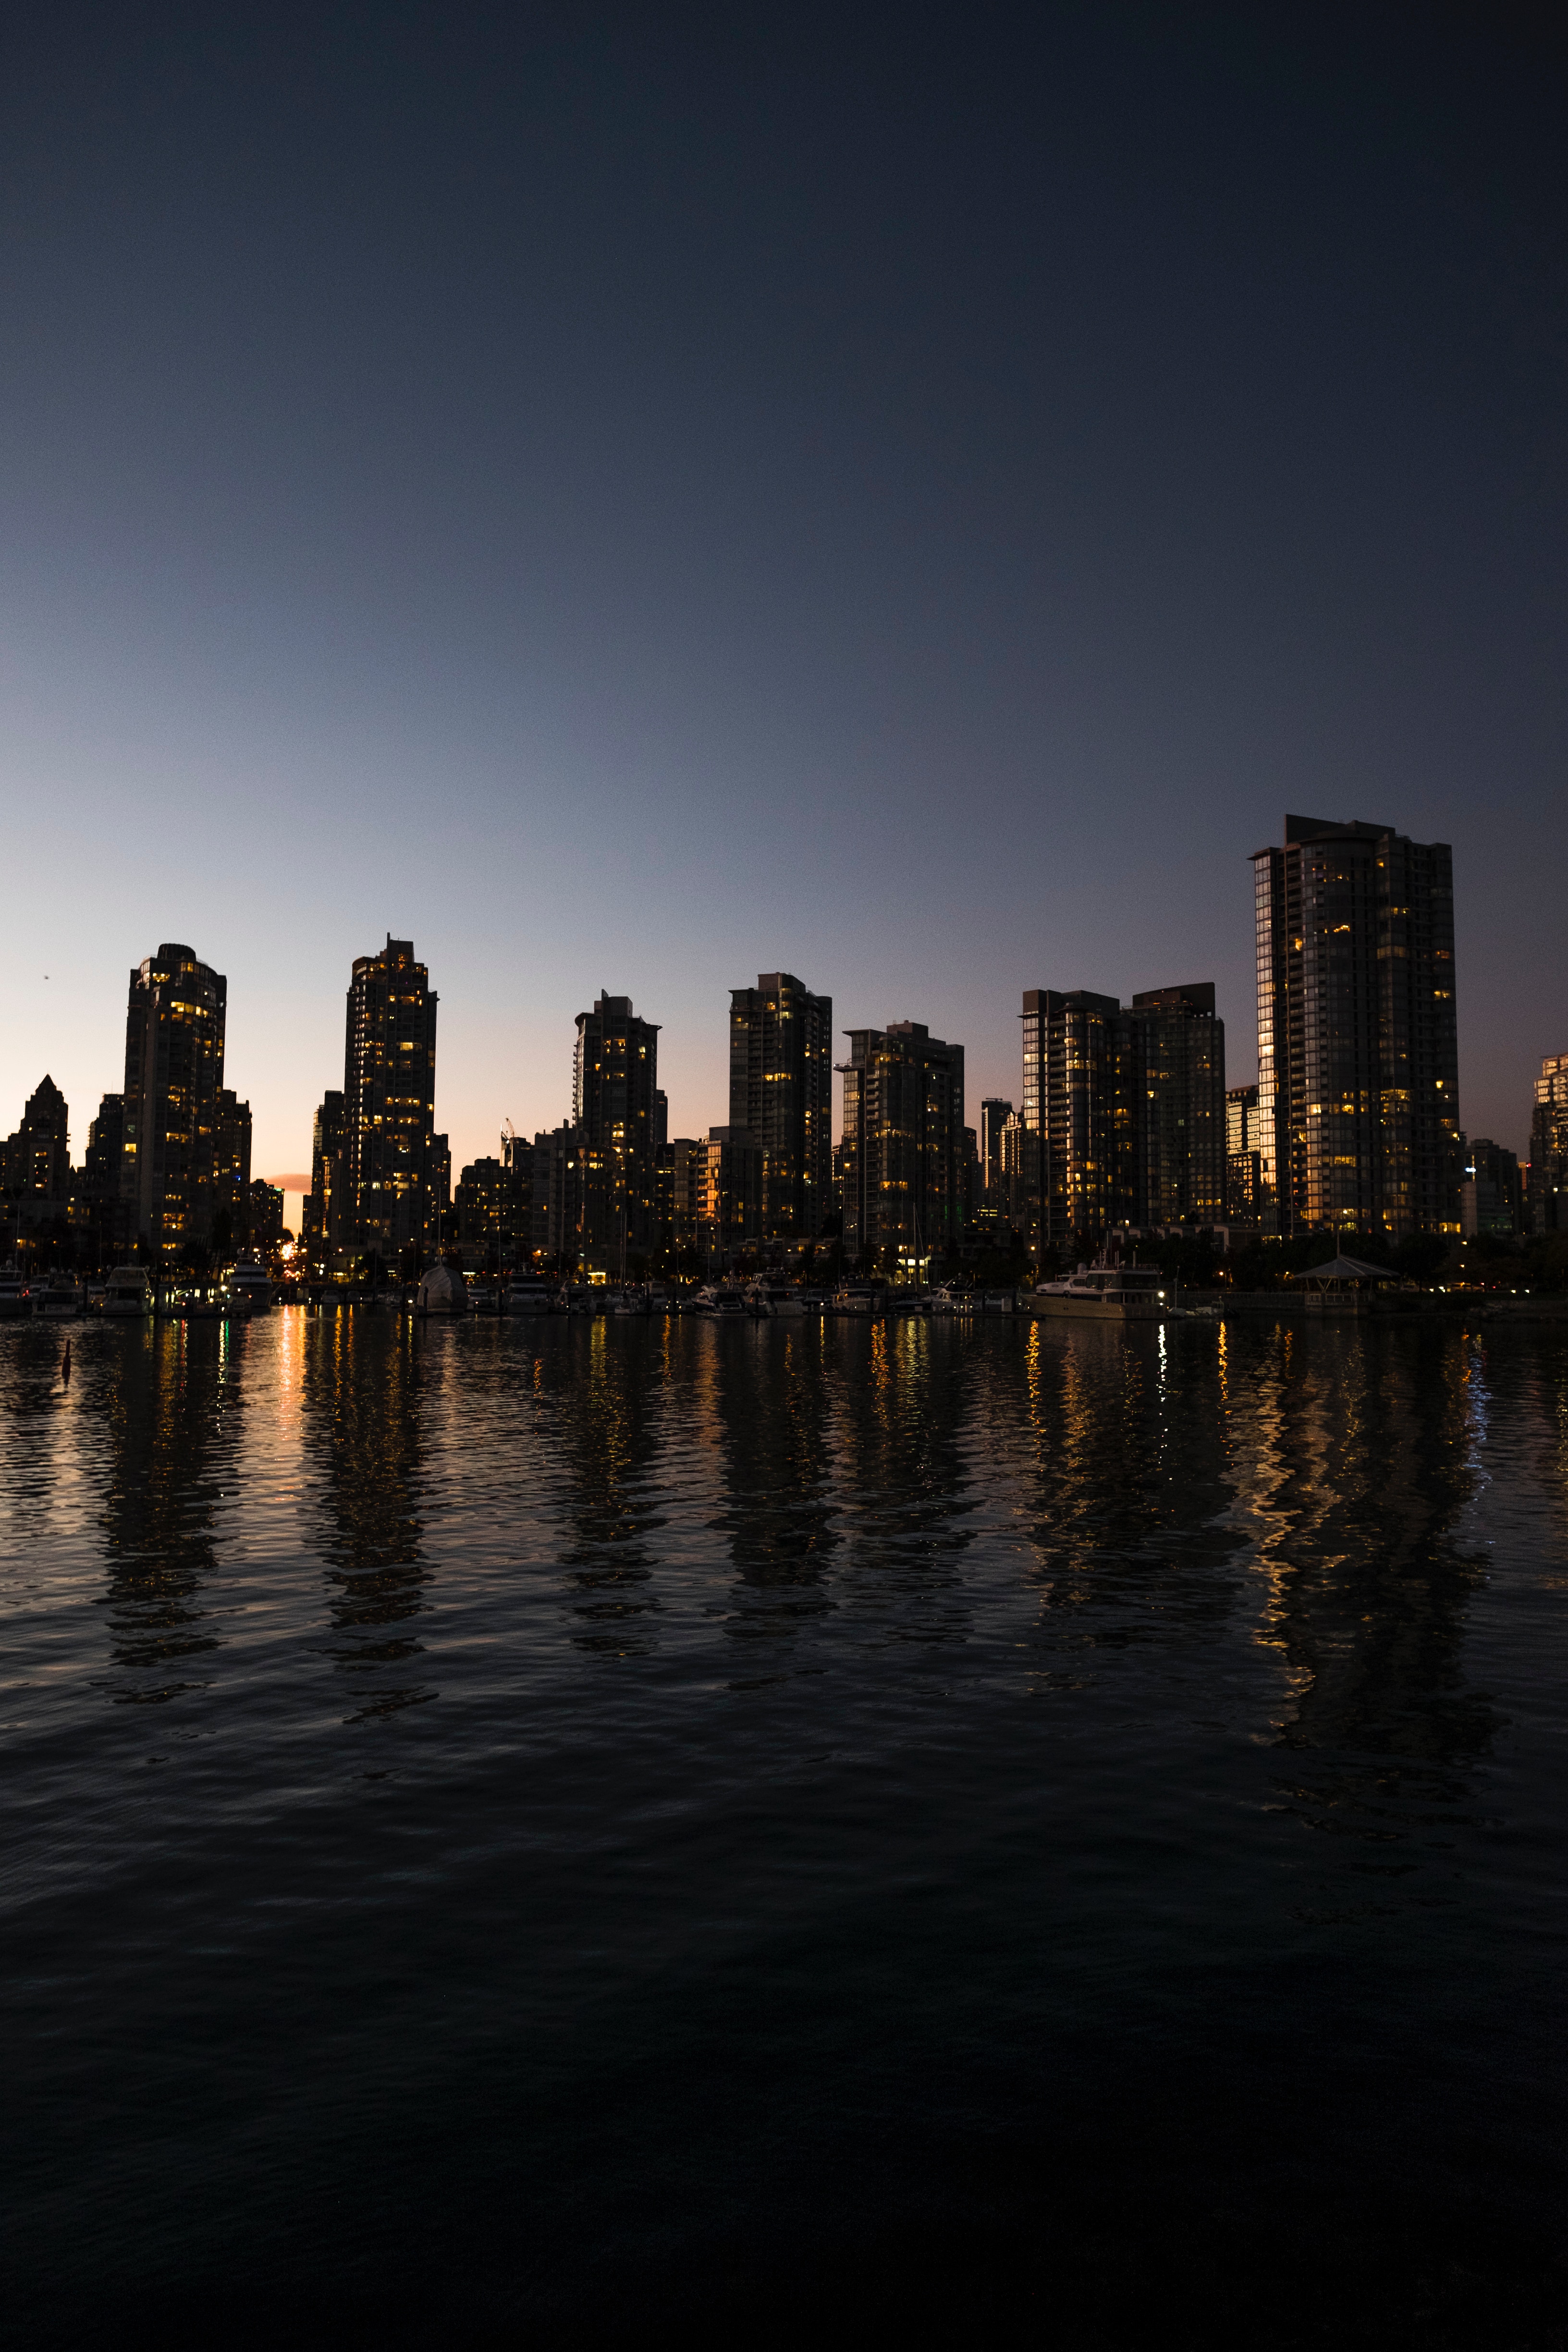 vancouver, cities, rivers, sky, reflection, canada, skyscrapers, evening, urban landscape, cityscape